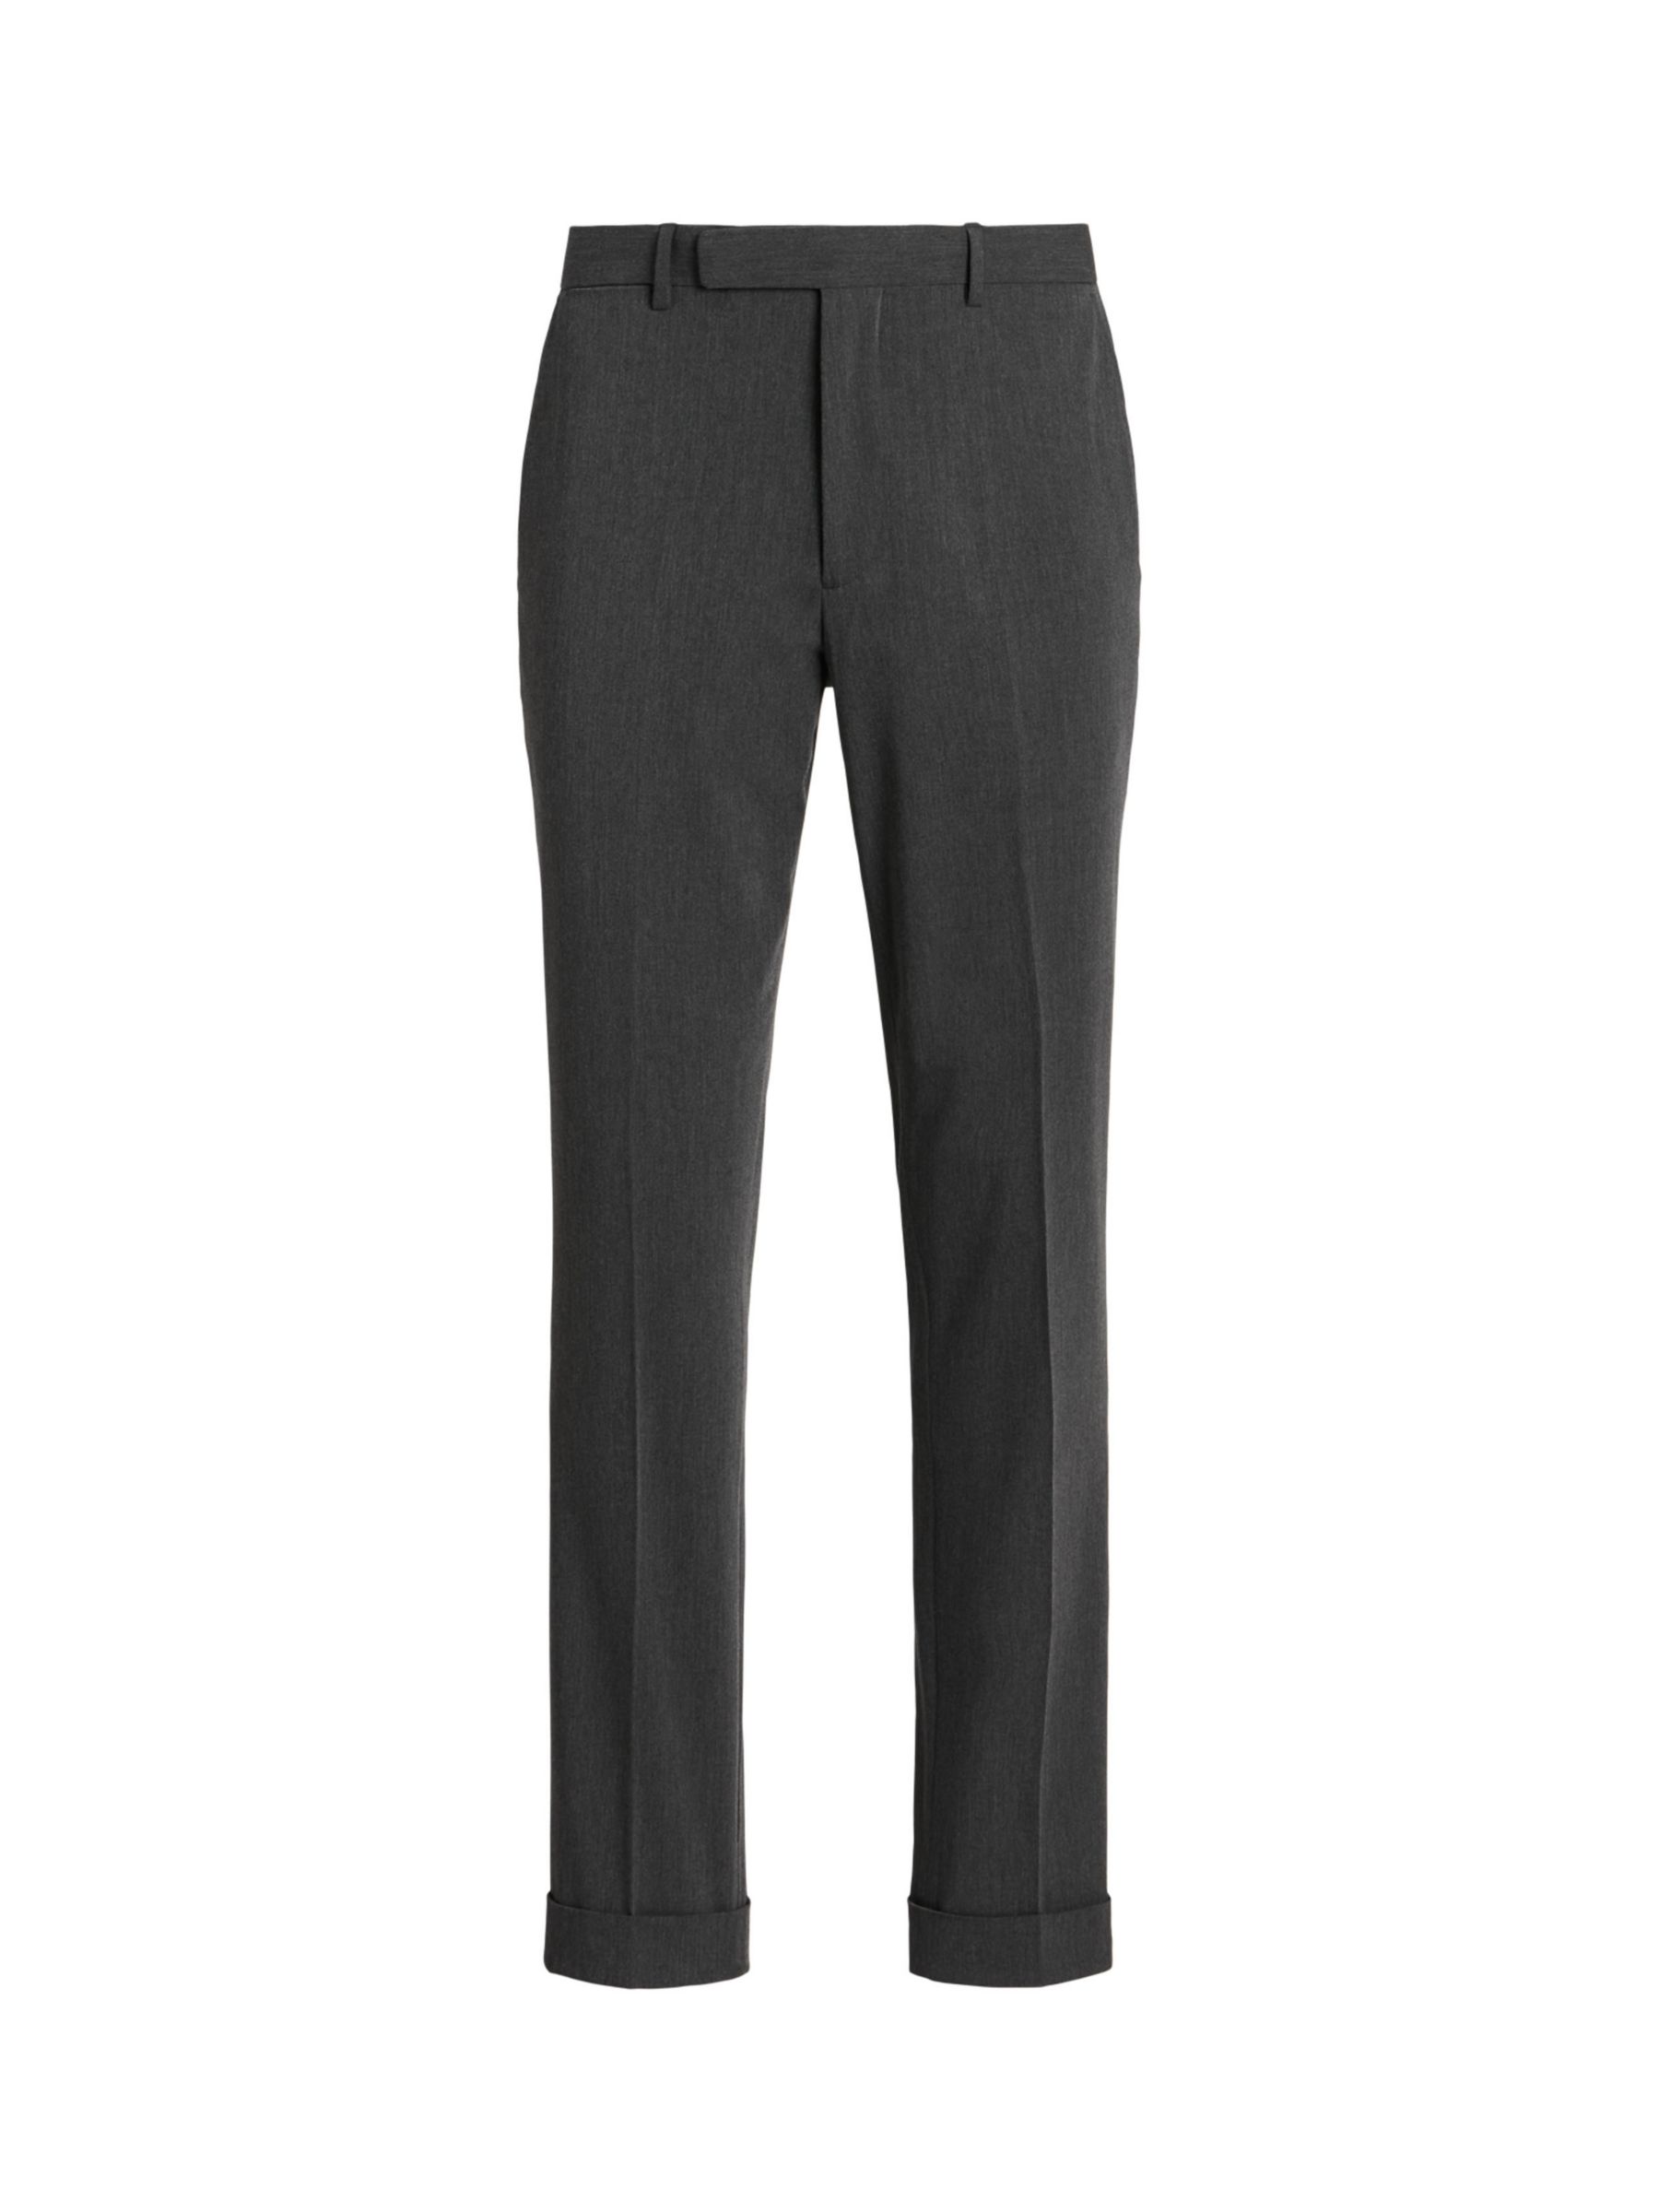 Polo Ralph Lauren Performance Stretch Twill Trousers, Charcoal, 30R